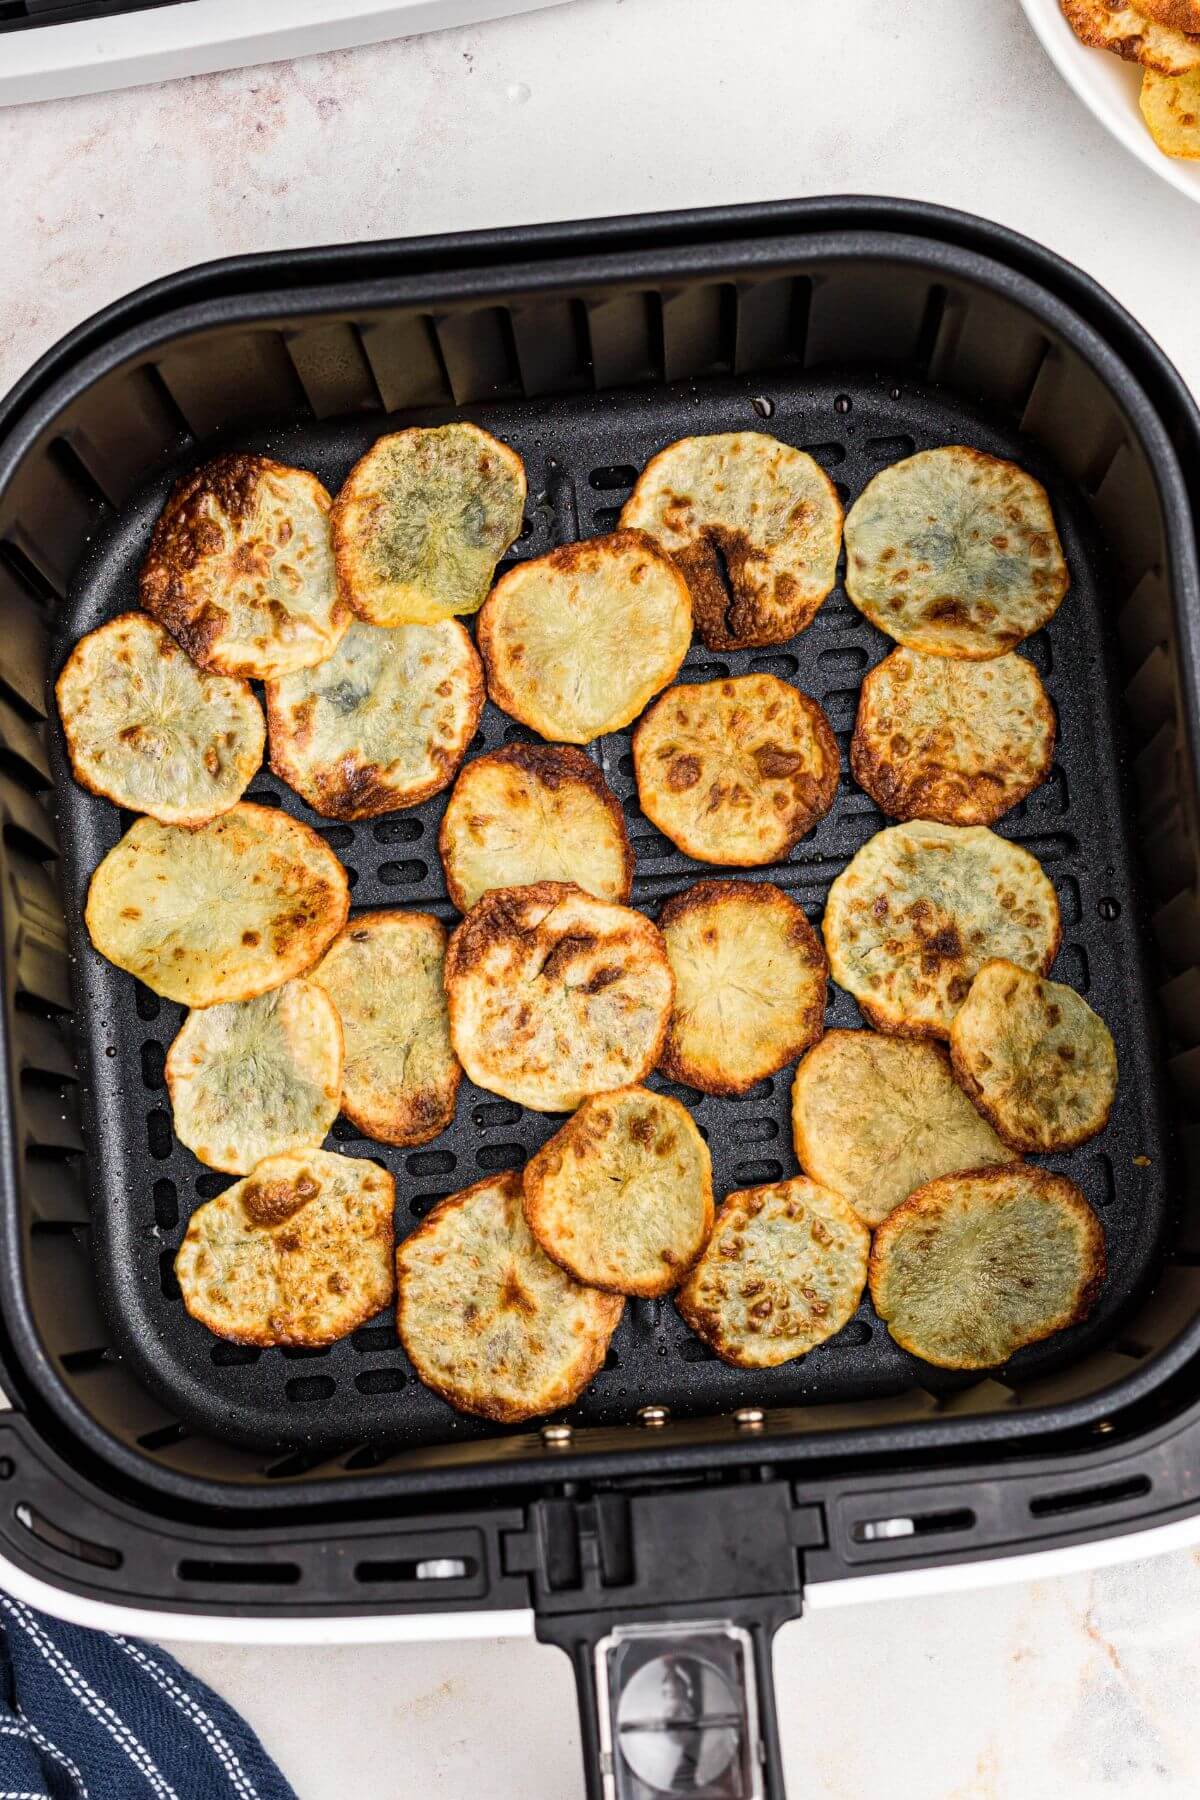 Potato chips cooked in the air fryer basket.